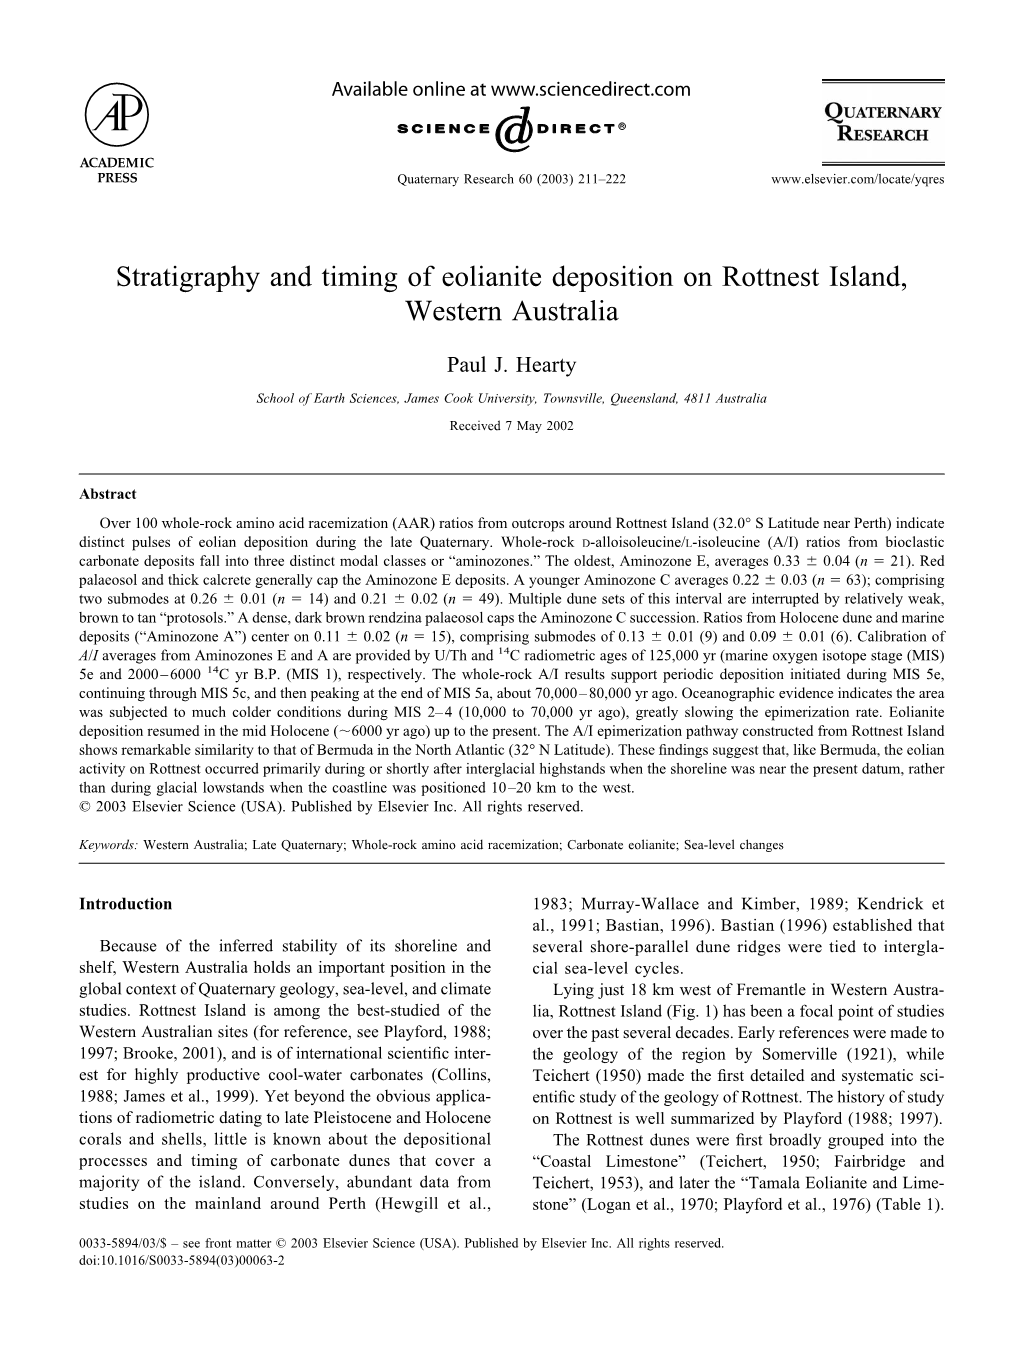 Stratigraphy and Timing of Eolianite Deposition on Rottnest Island, Western Australia